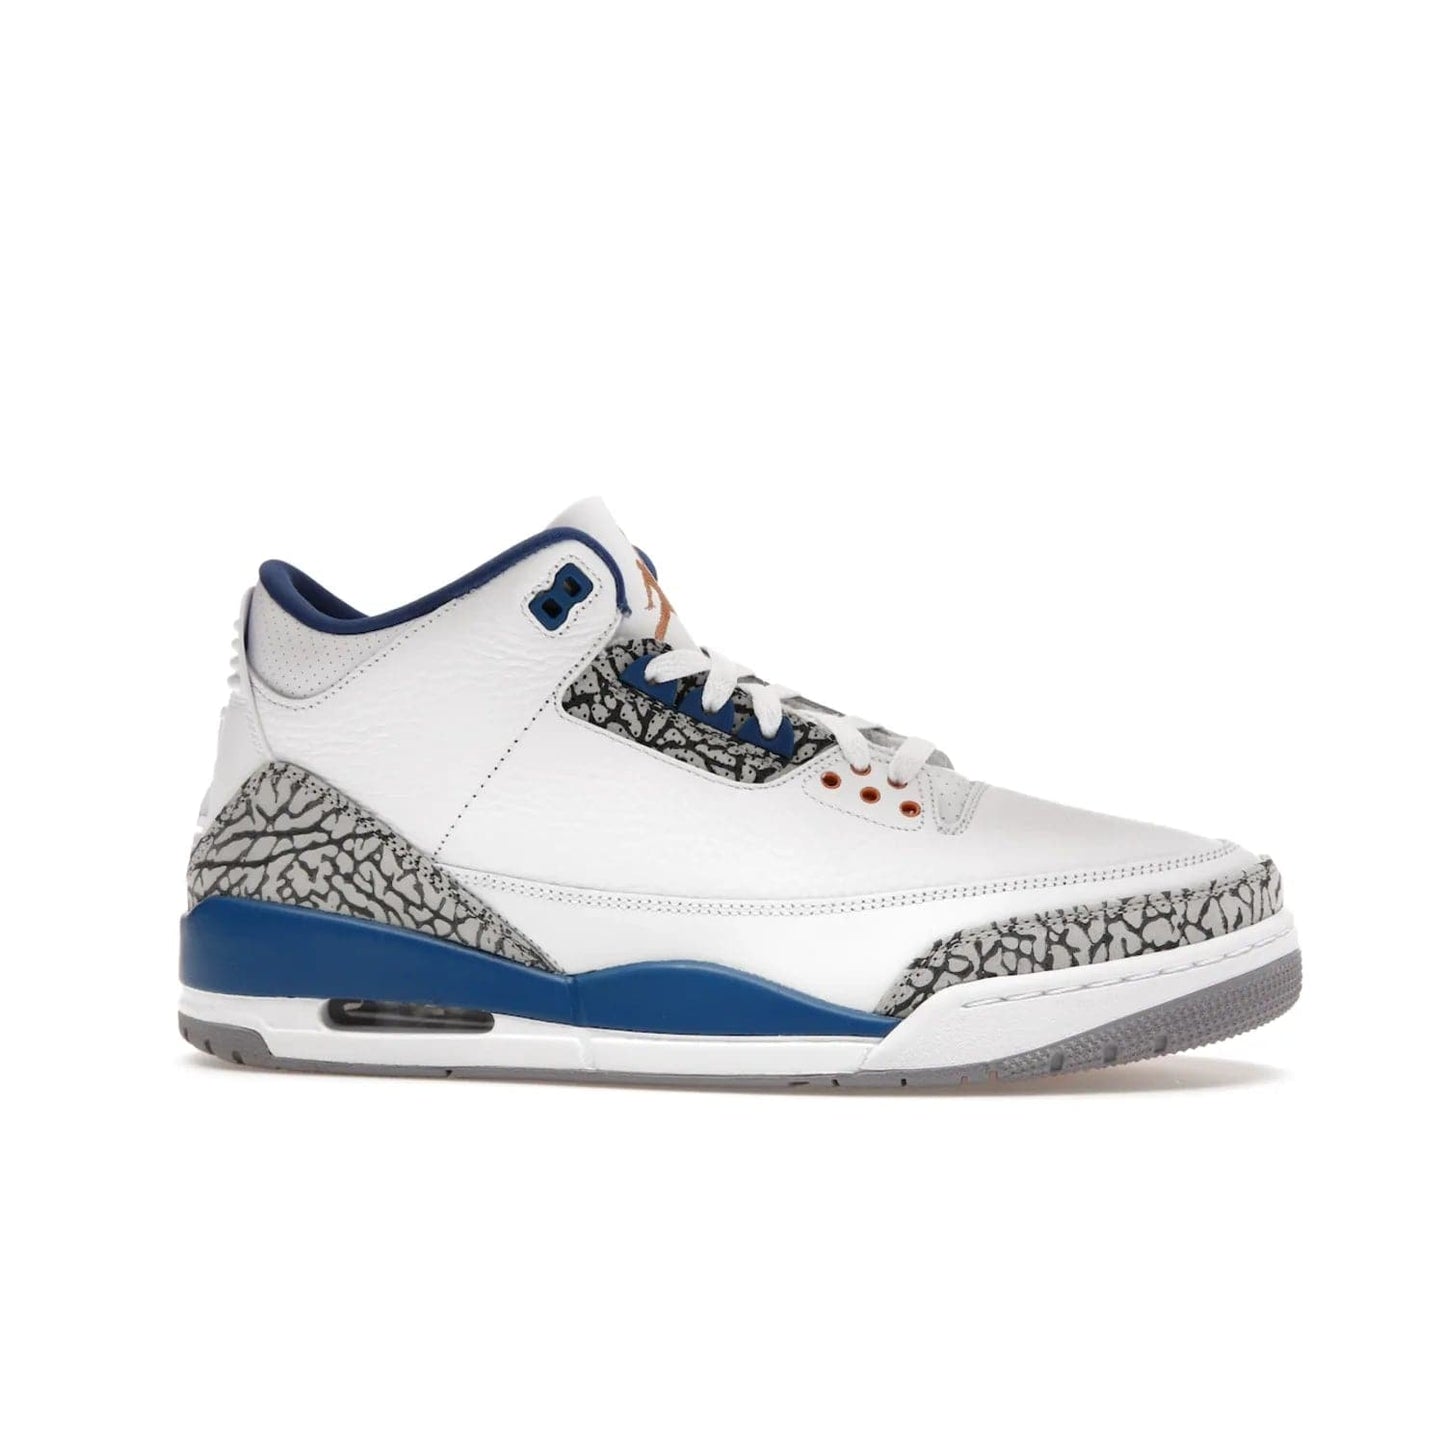 Jordan 3 Retro Wizards - Image 2 - Only at www.BallersClubKickz.com - ##
Special tribute sneaker from Jordan Brand to Michael Jordan's time with the Washington Wizards. Iconic white upper, orange Jumpman logo, blue accents, metallic copper details, and cement grey outsole. Buy the Air Jordan 3 Retro Wizards April 29, 2023.